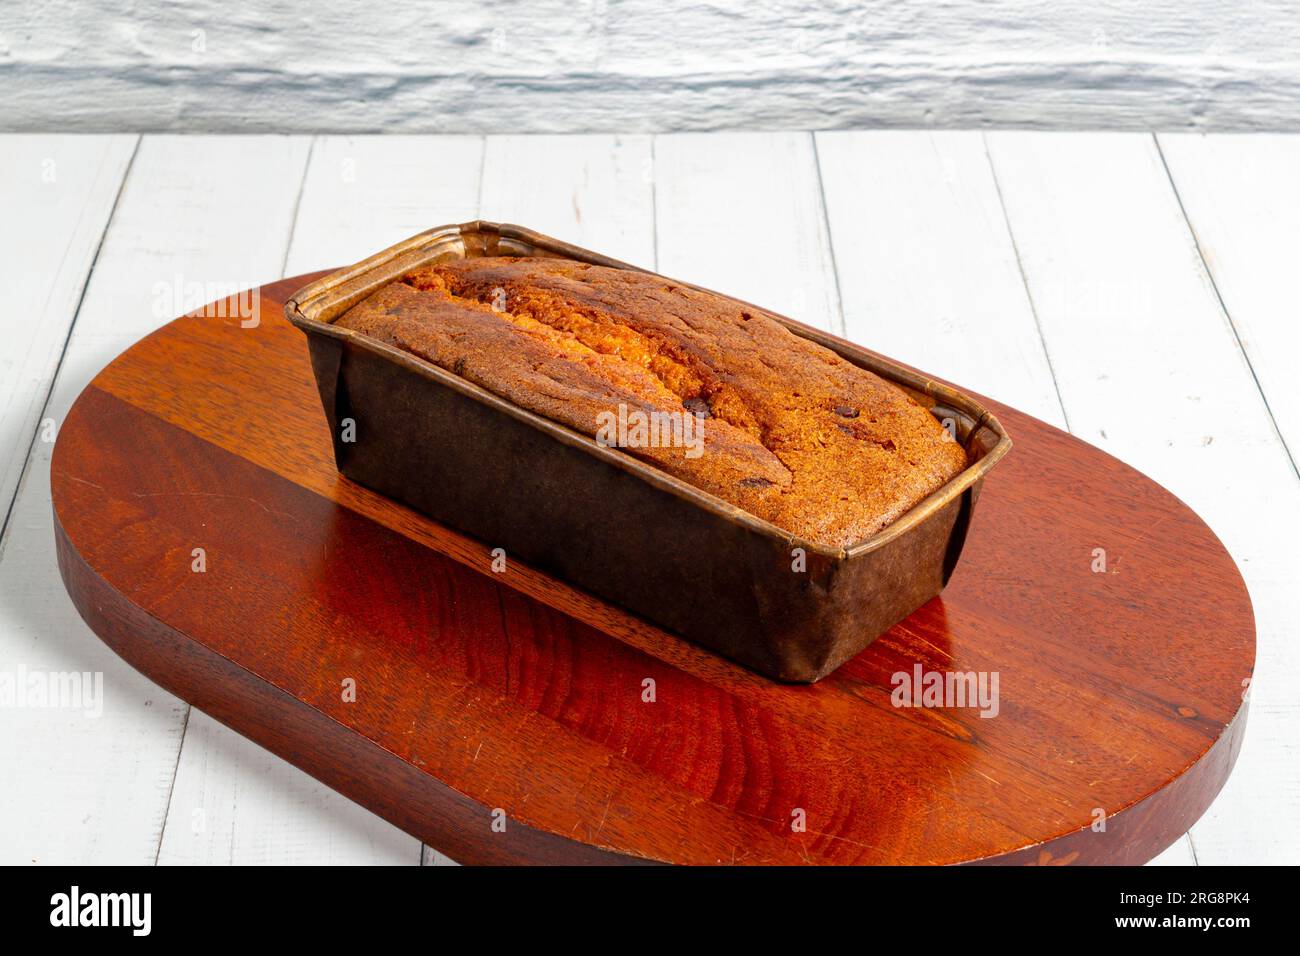 An English cake in a baking dish on a wooden board and a white wooden  table. Selective focus Stock Photo - Alamy